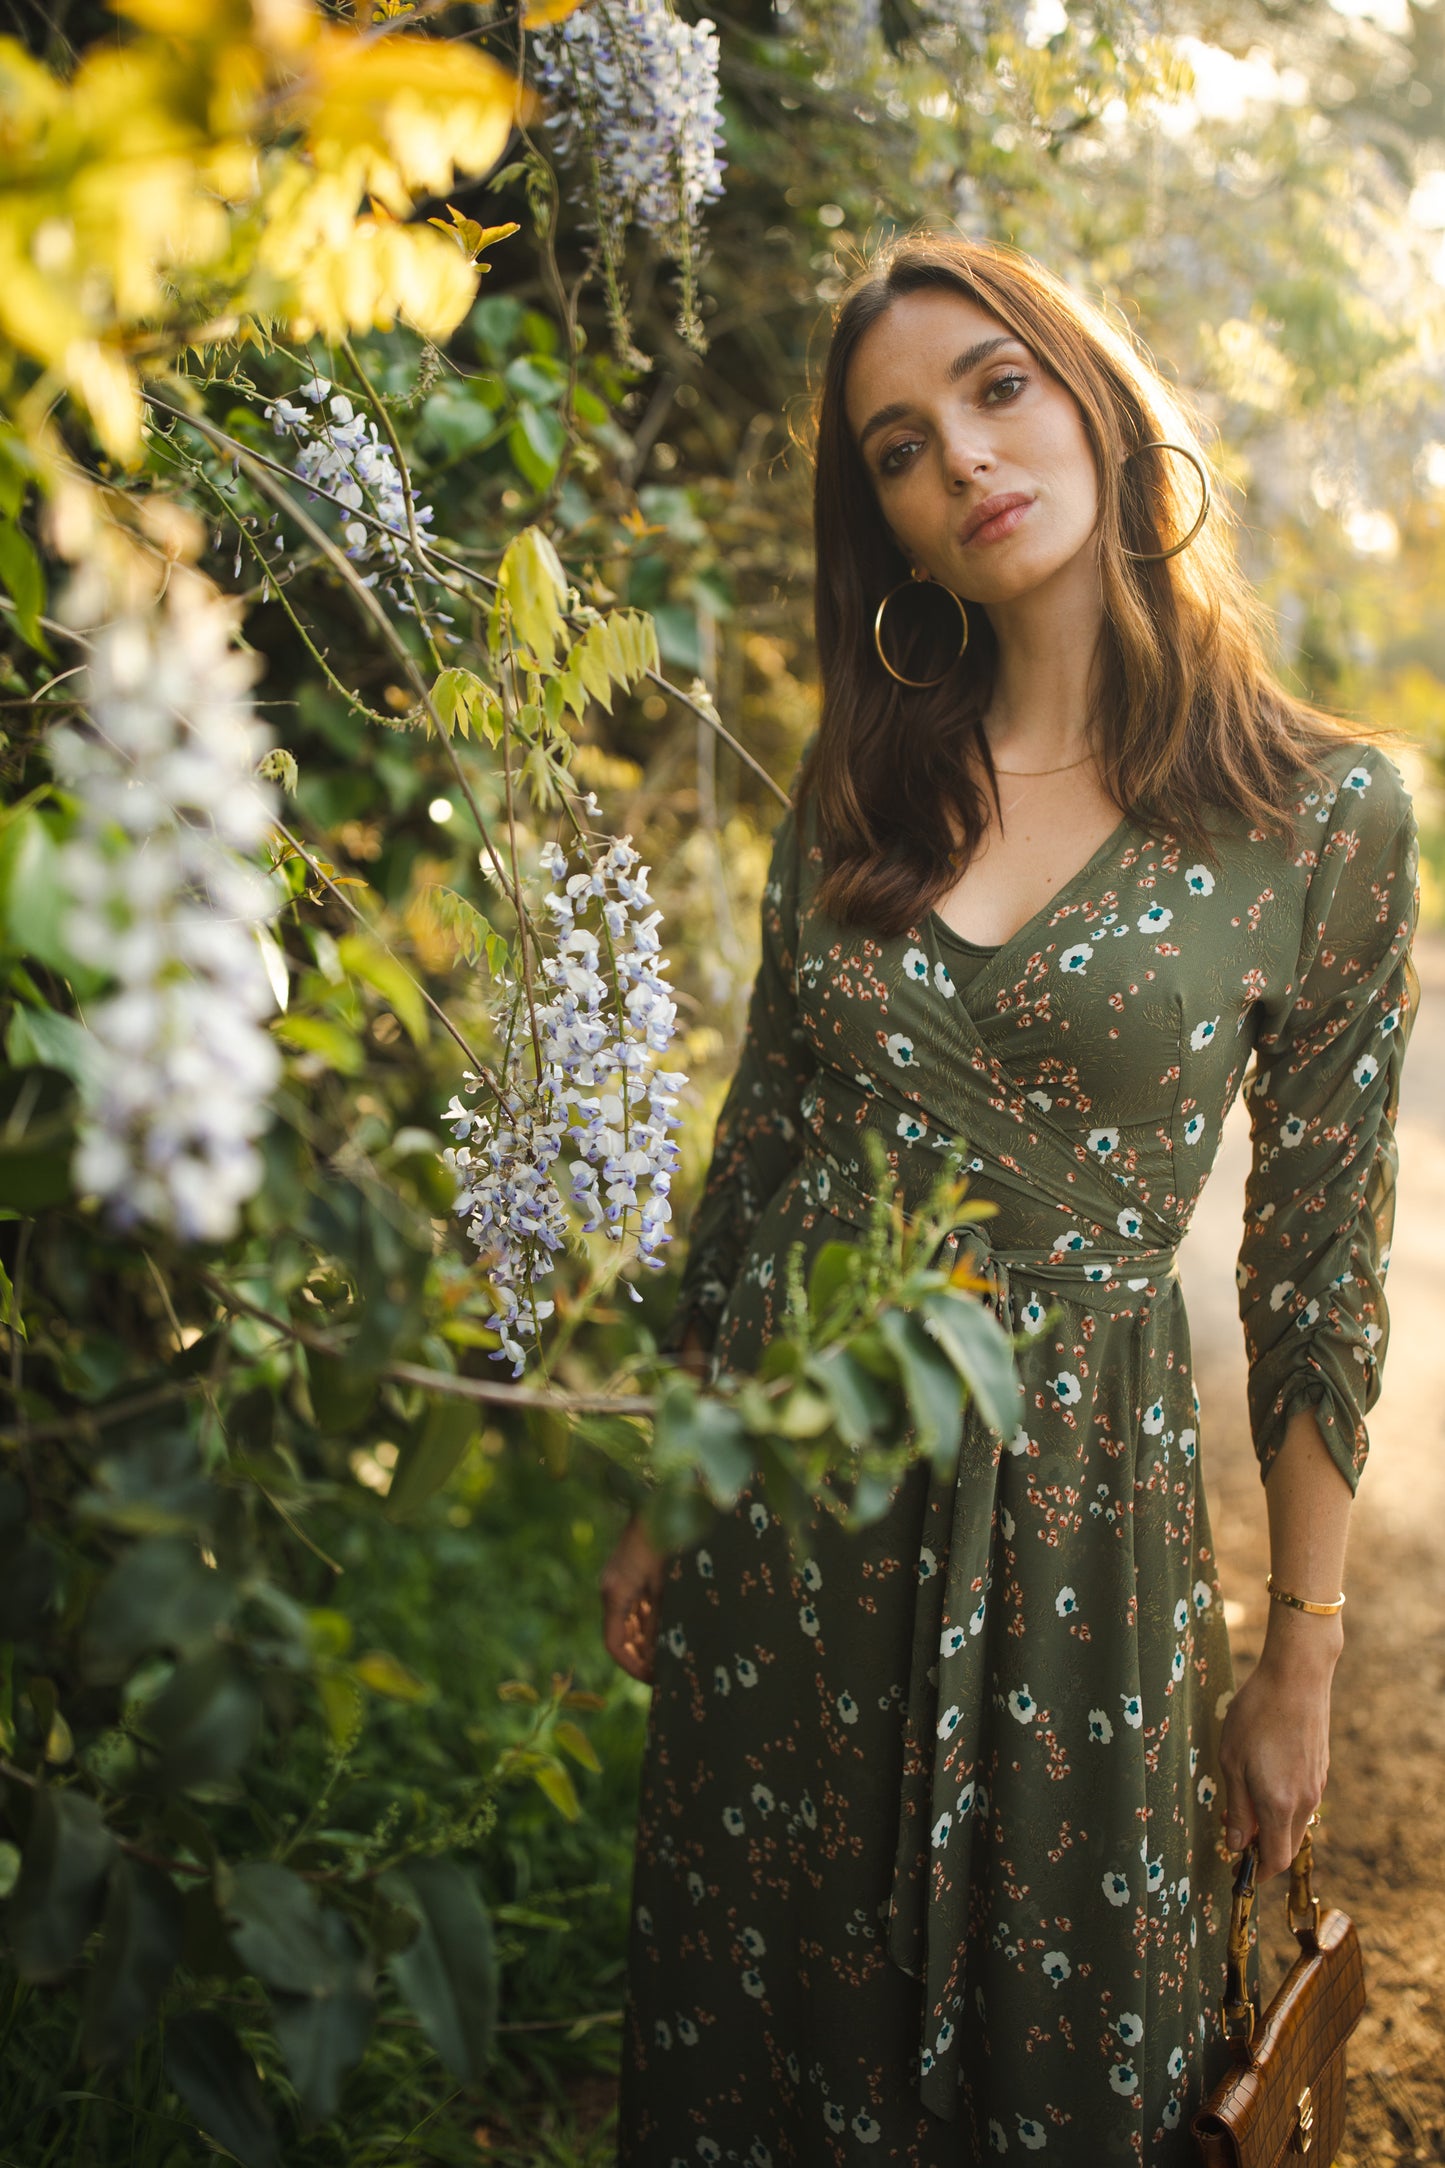 jennafer grace Signature Wrap Dress in Sage Blossom pale green maxi dress with pastel floral flower print with long waist tie and ruched sleeves boho bohemian hippie romantic whimsical spring gown wedding guest dress unisex handmade